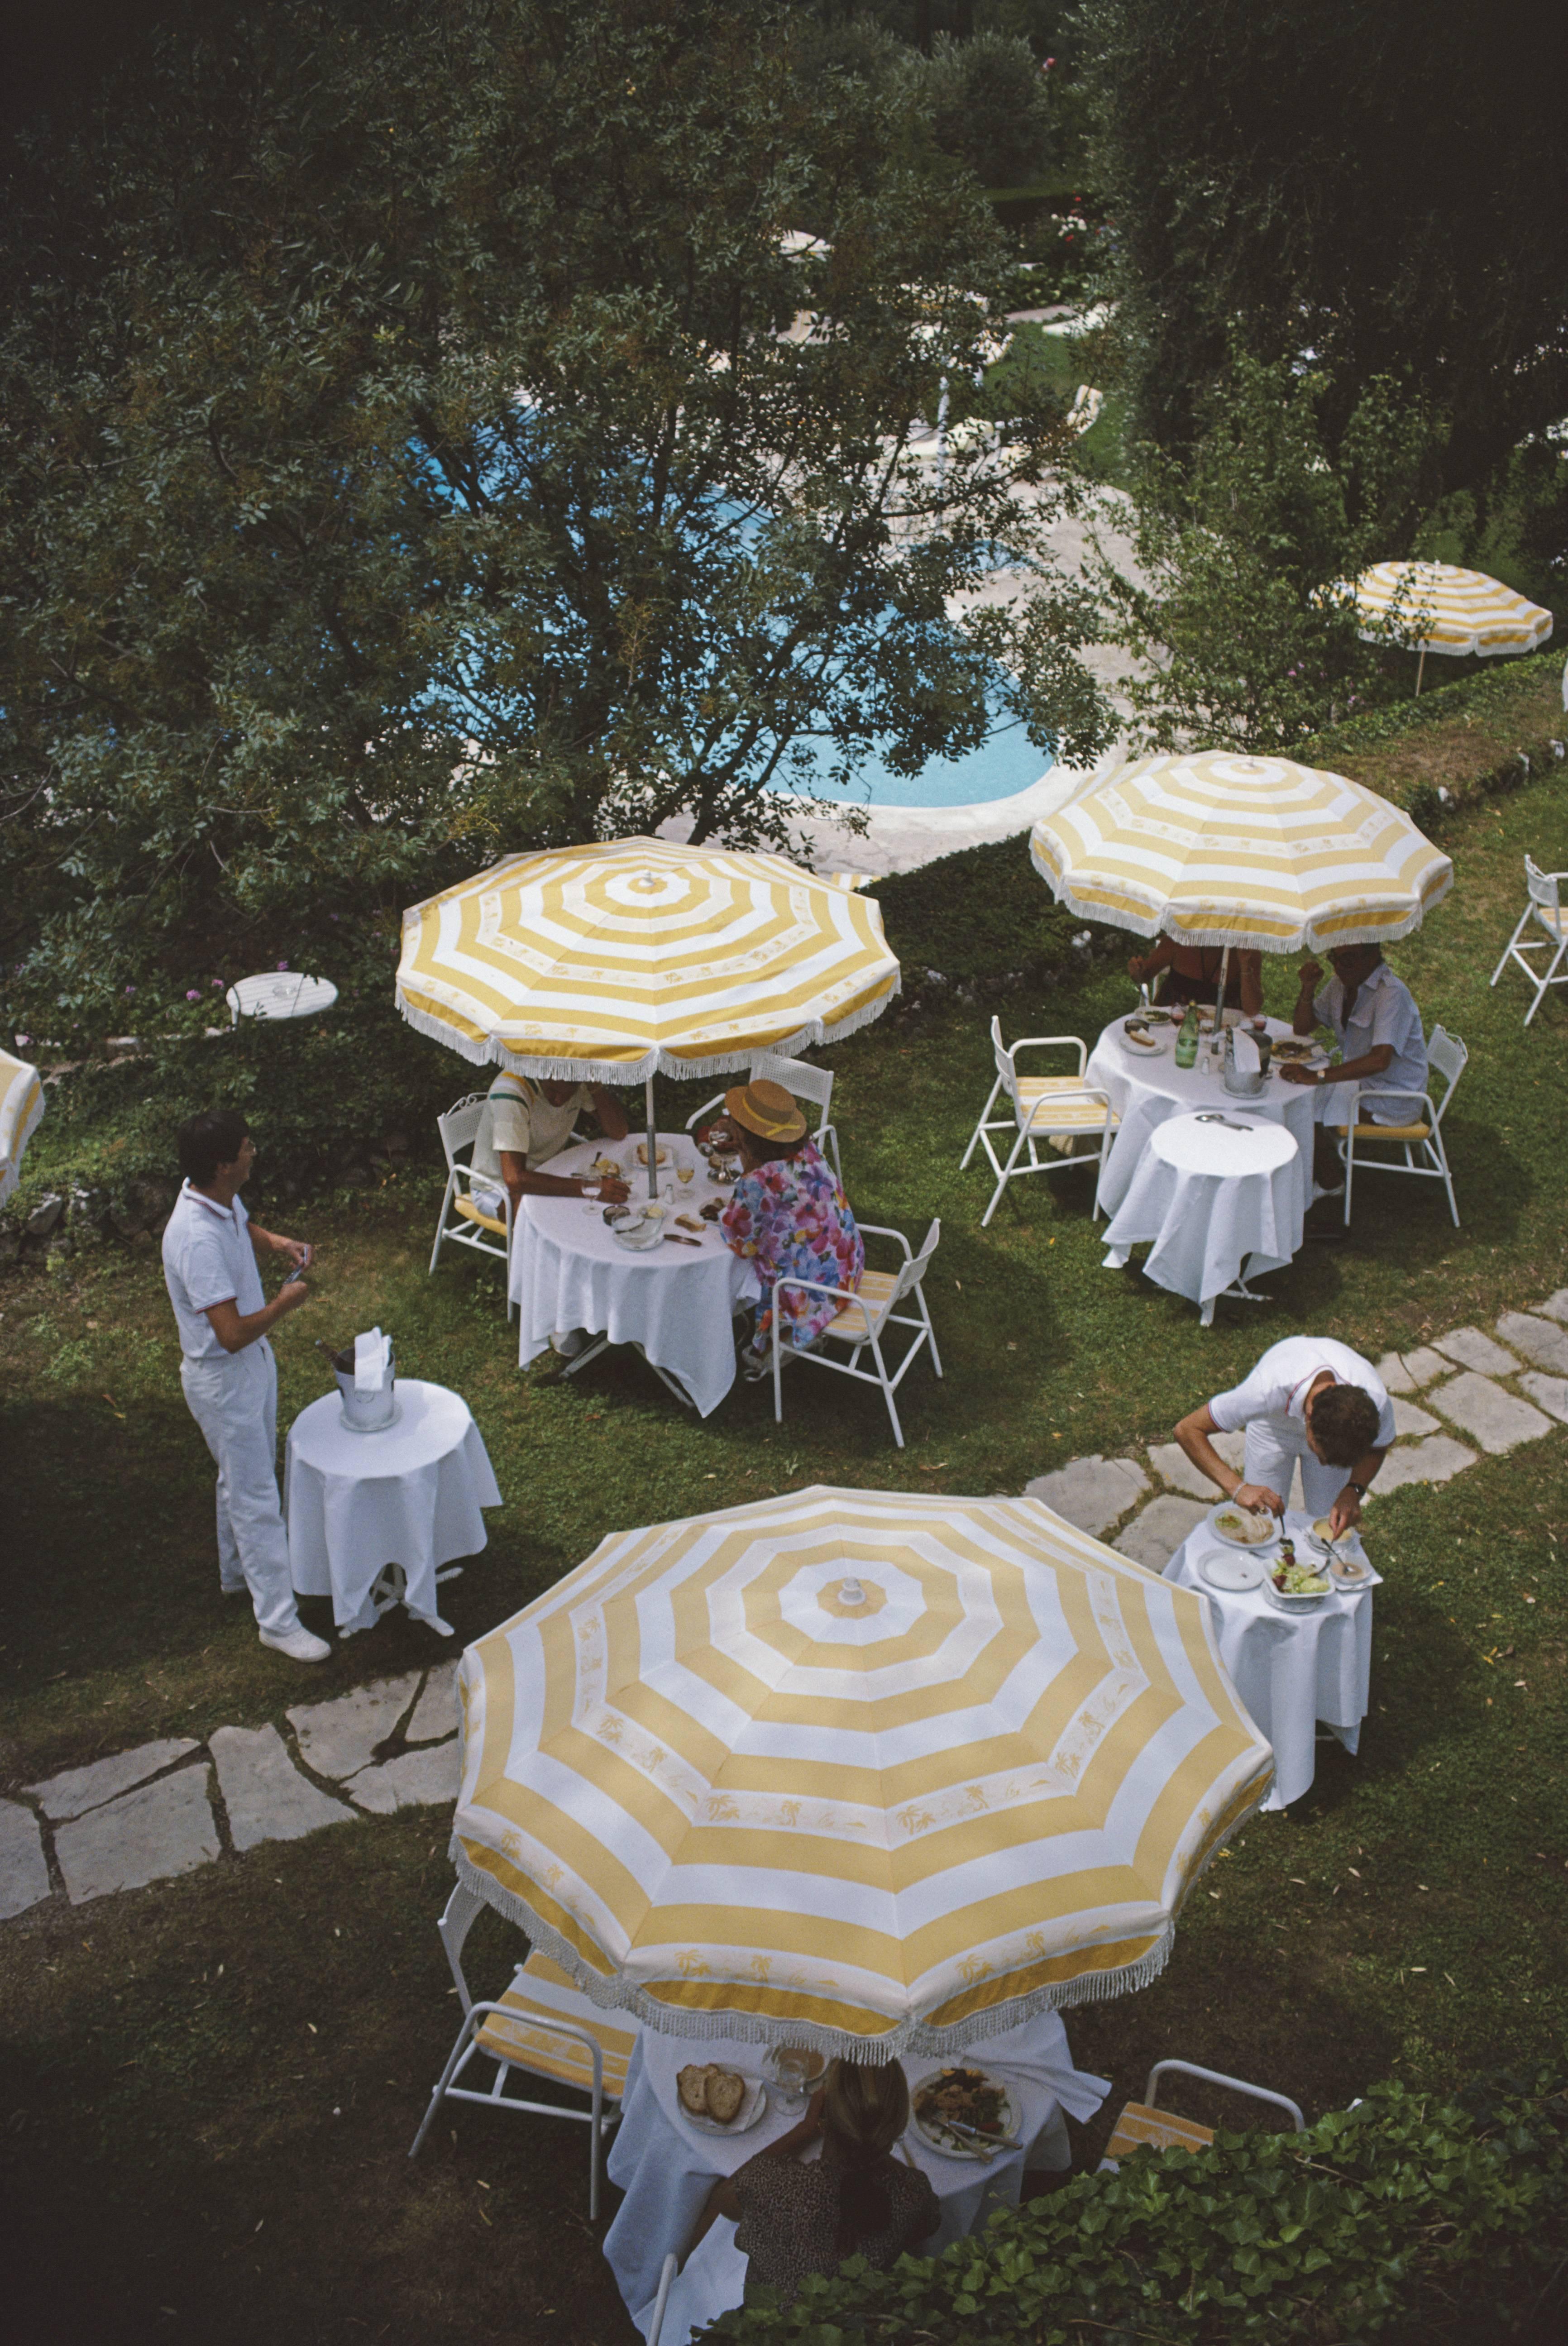 Slim Aarons Color Photograph - Chateau Saint-Martin (Estate Stamped Limited Edition) 20x24